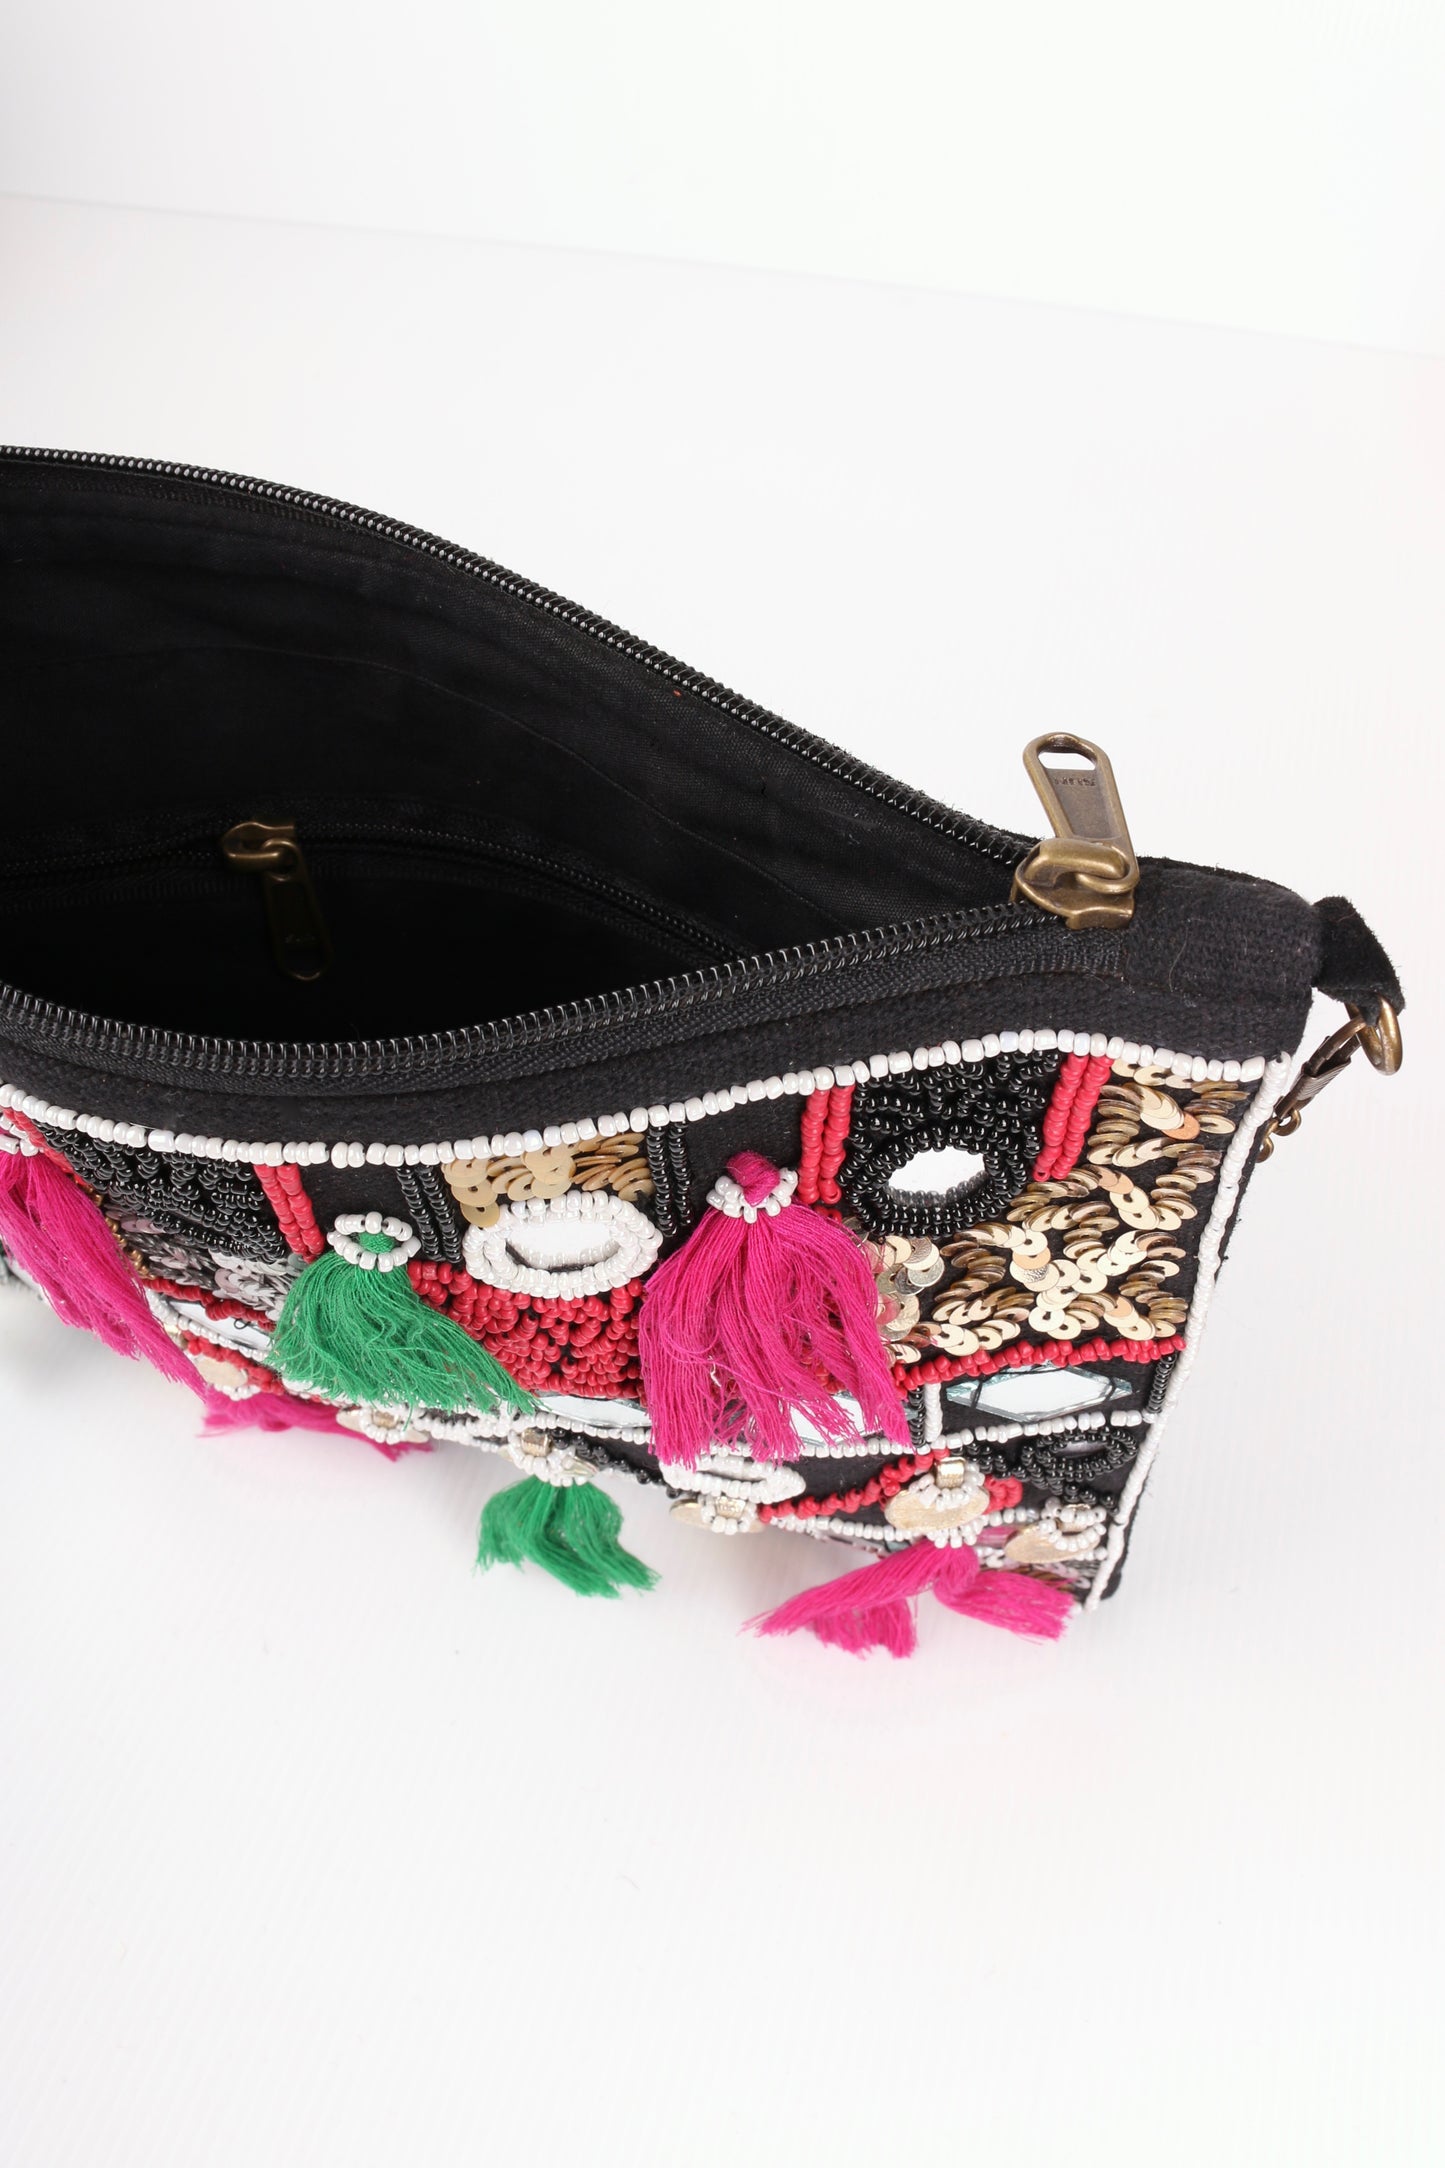 Persia Bag- tassle, beading and mirror embellished bag with black 100% suede leather body.